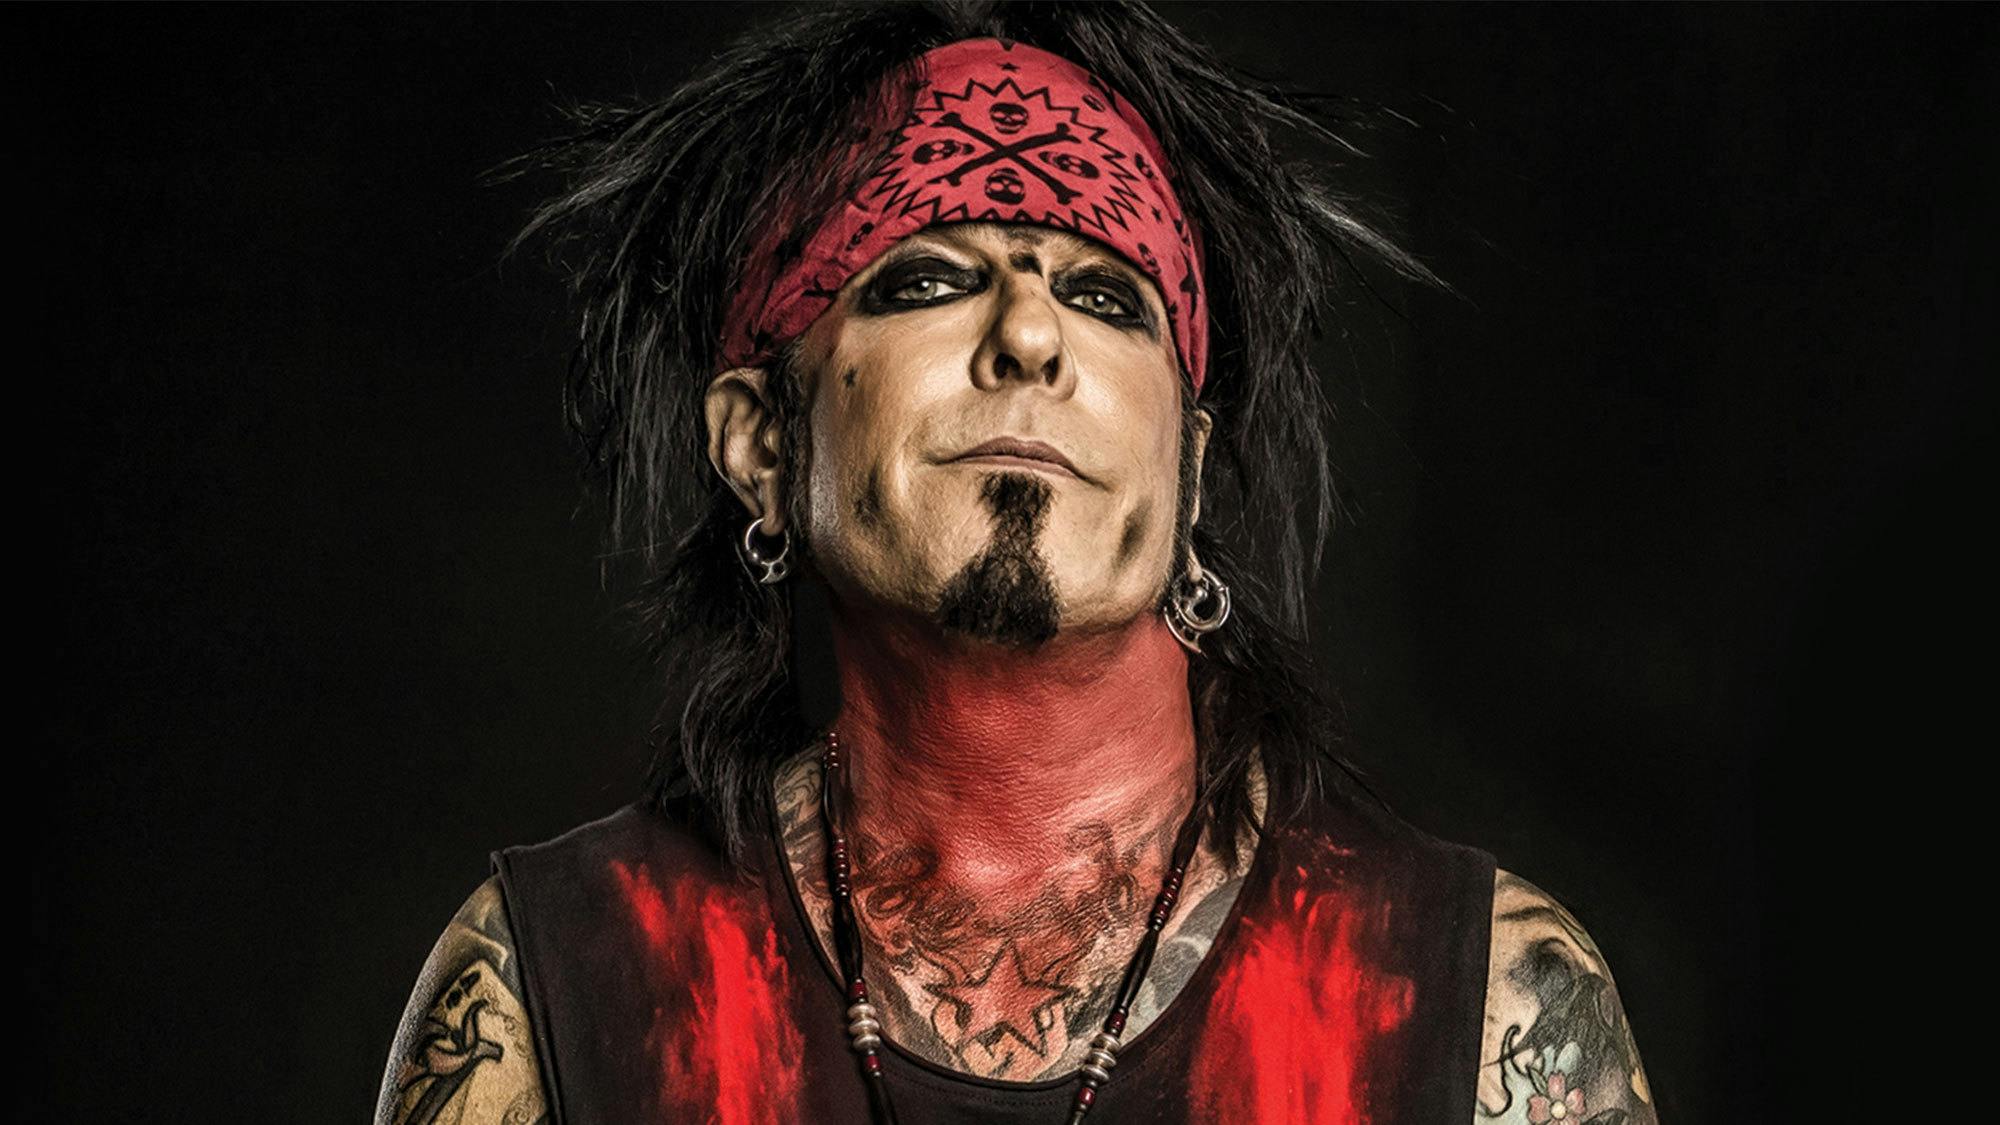 Nikki Sixx on if Mötley Crüe were sexist in their heyday: “In today’s environment, most probably”